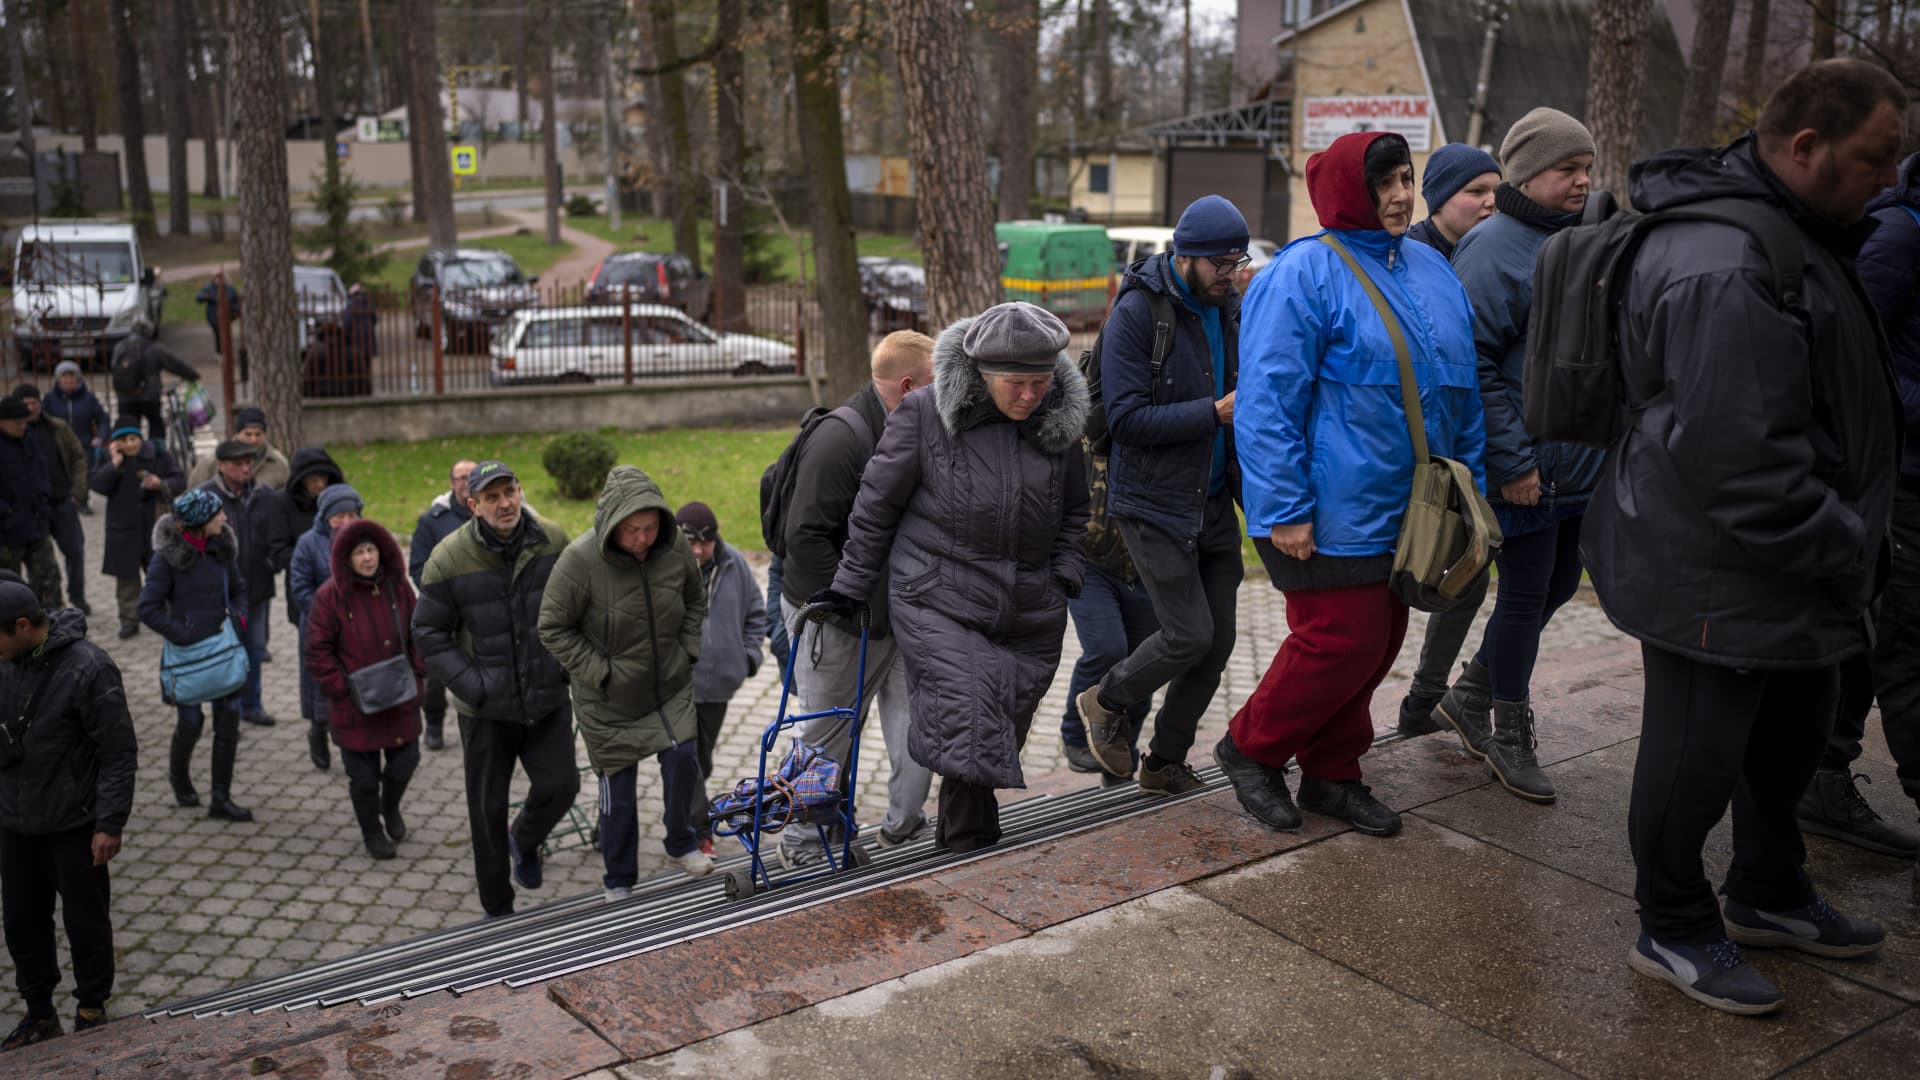 Ukrainians enter a church to receive humanitarian aid donated by European Union in Bucha, on the outskirts of Kyiv, on Tuesday, April 19, 2022.